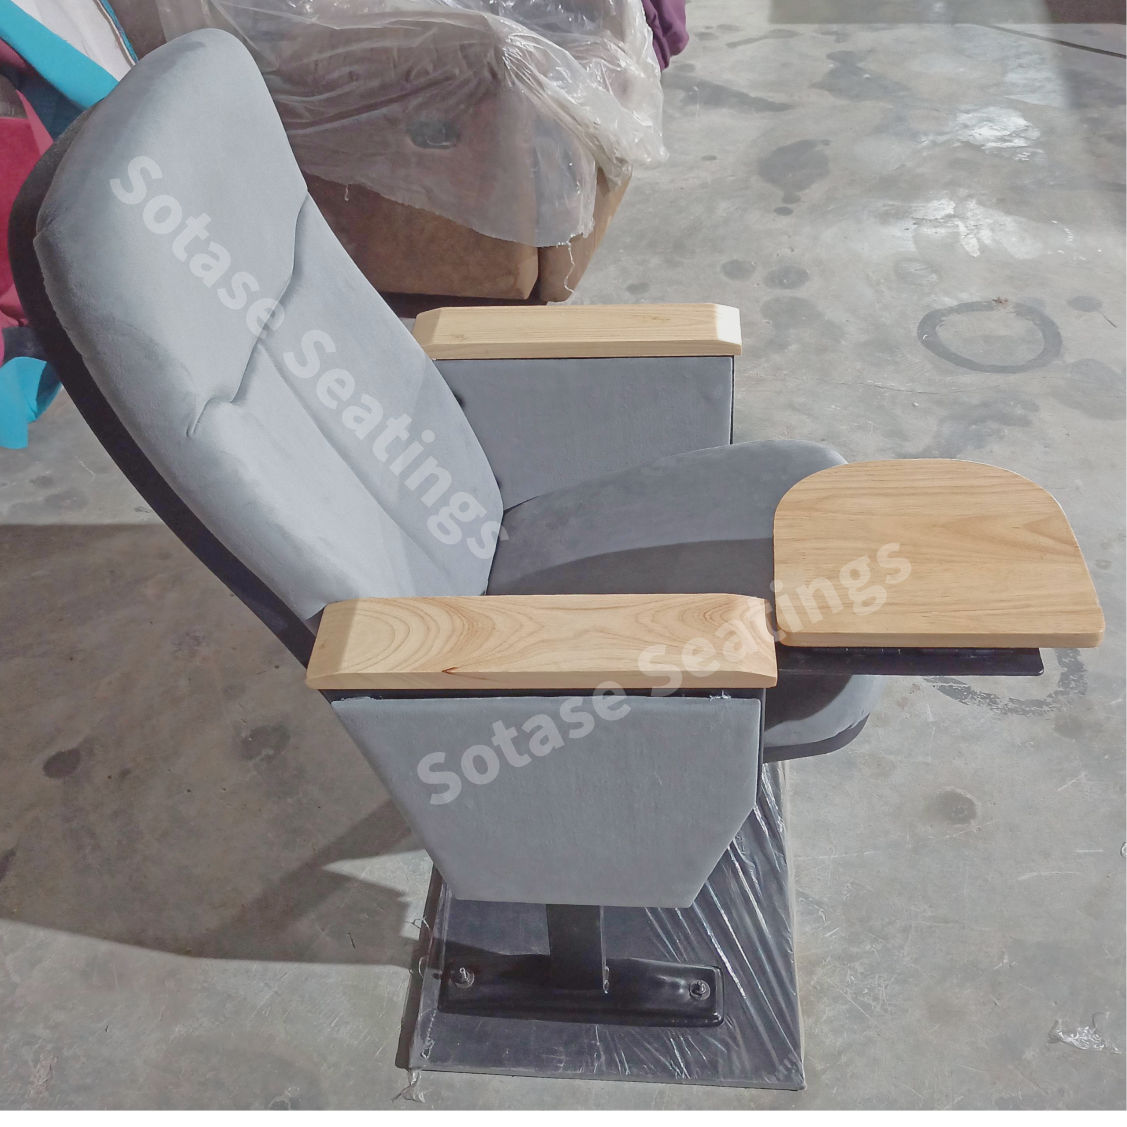 Sotase Fix Auditorium Chair With Writing Pad